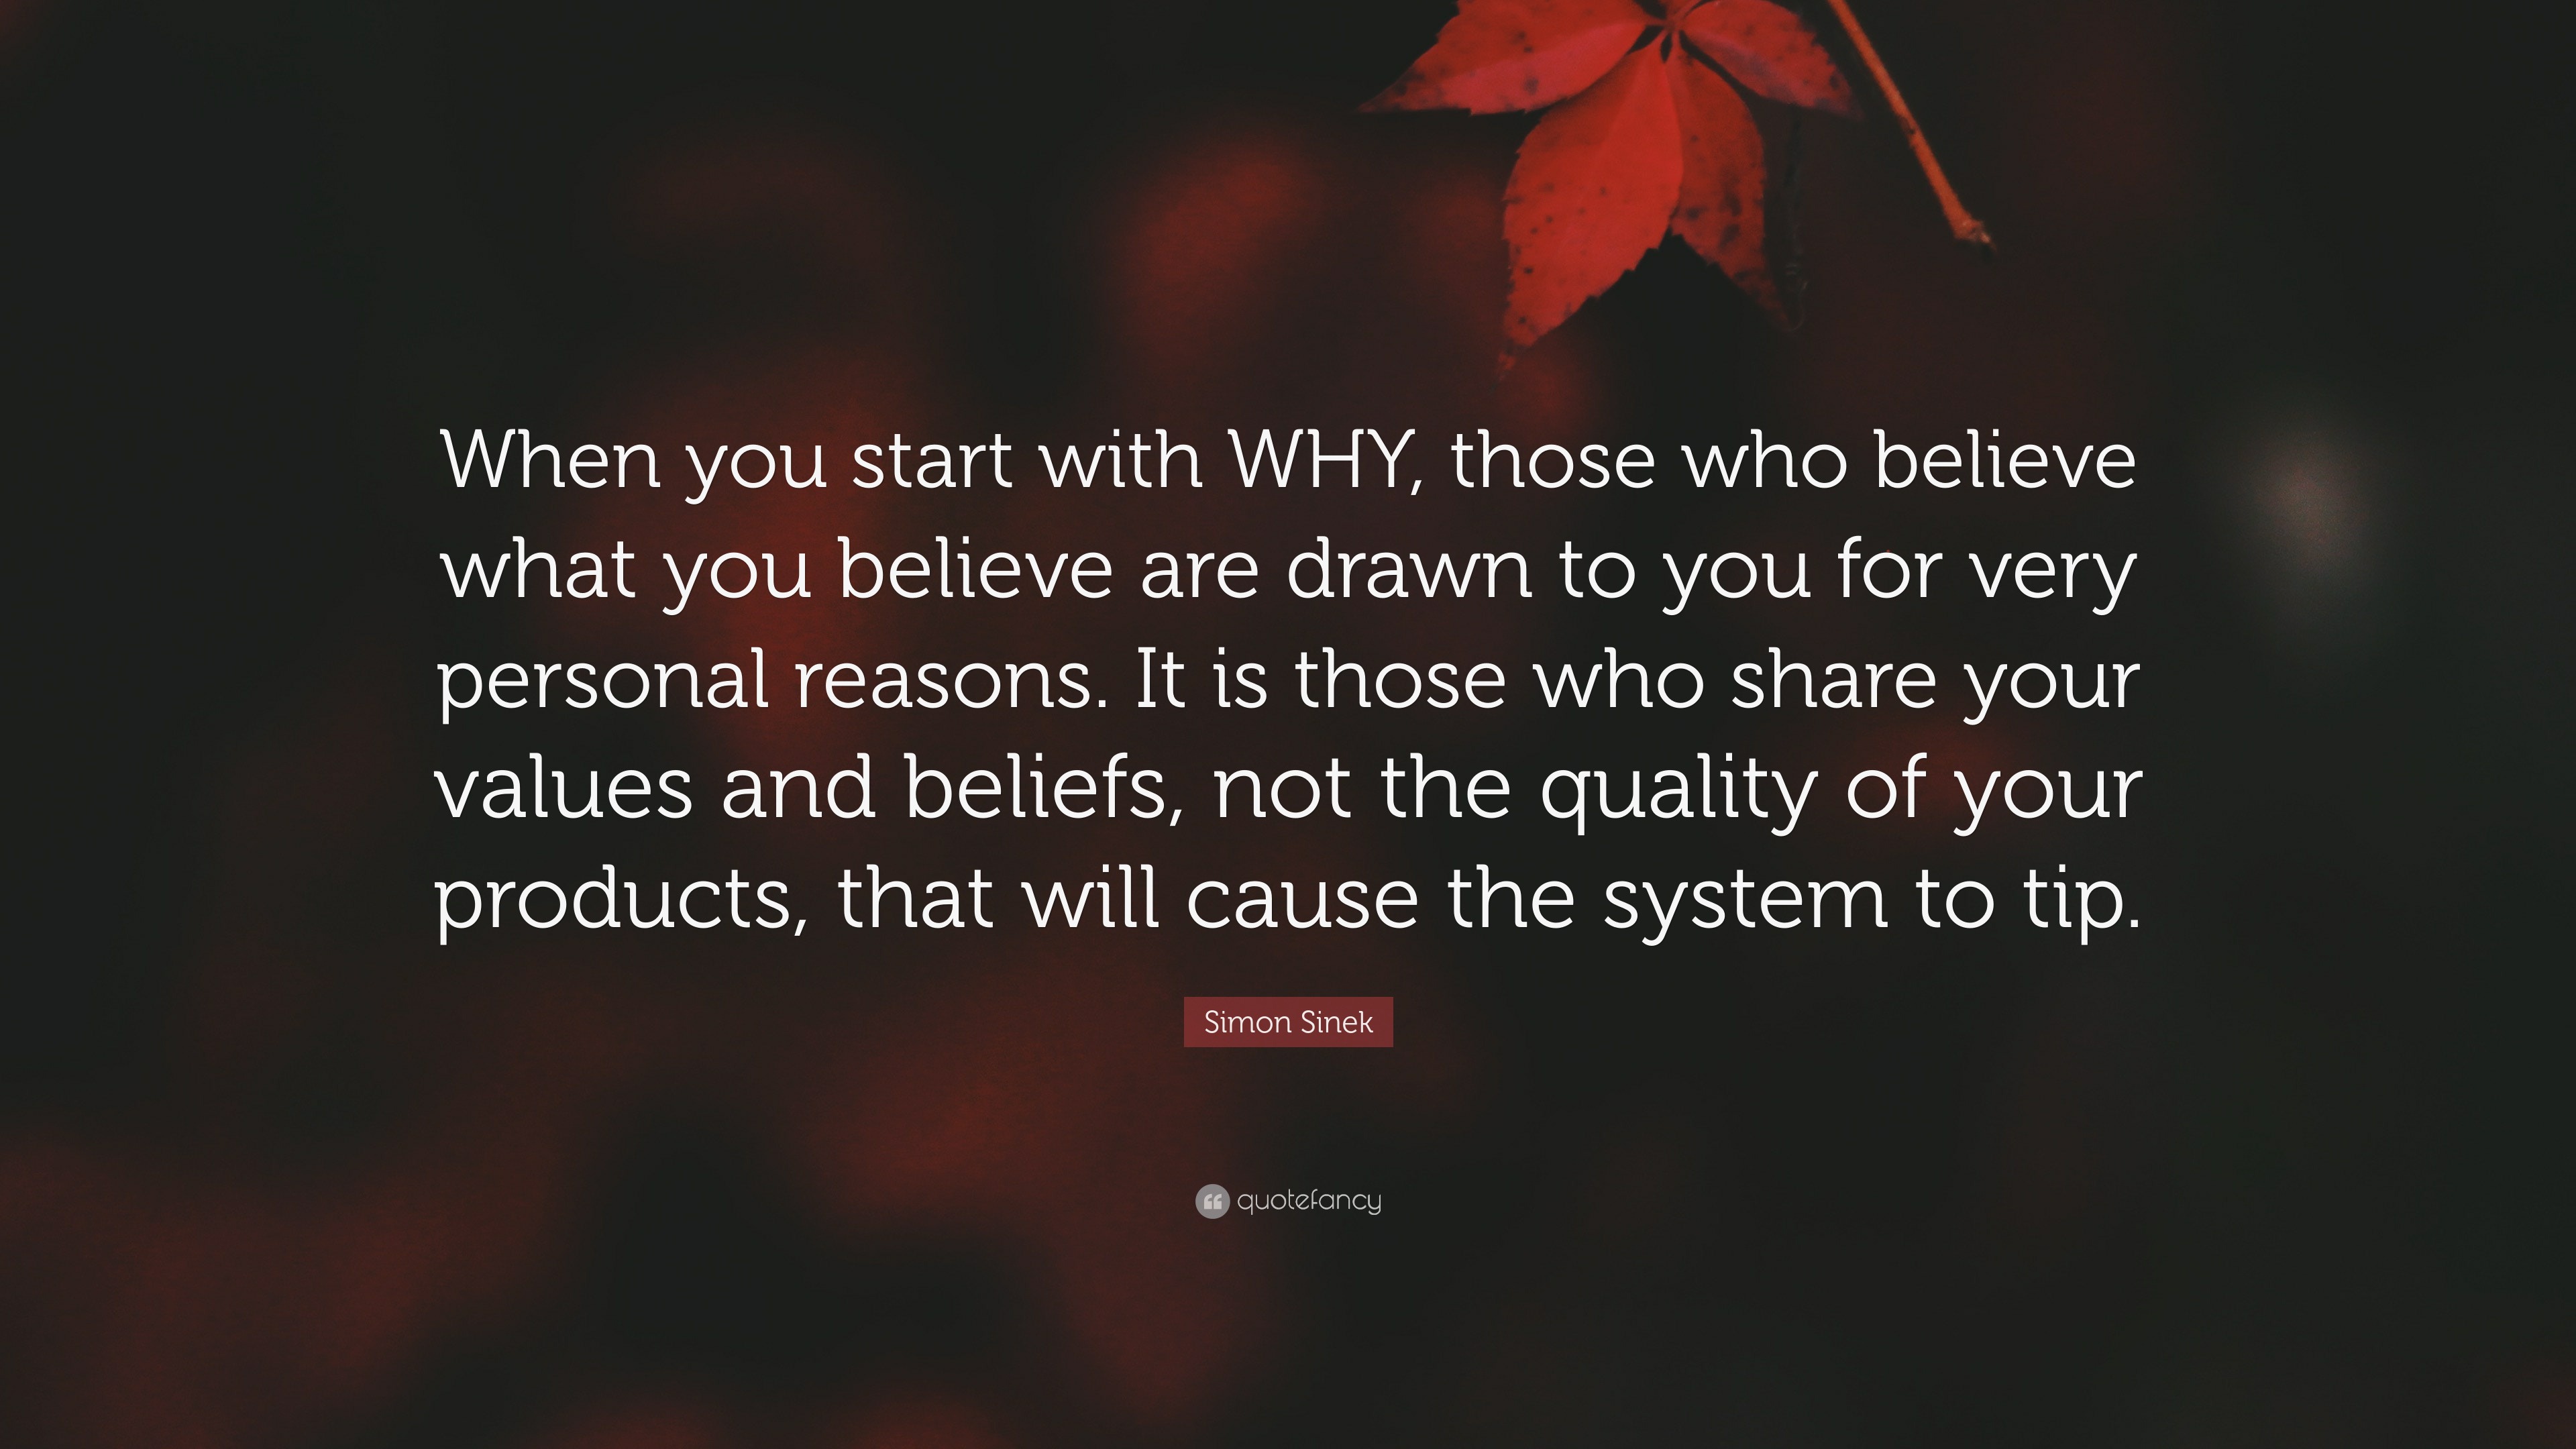 https://quotefancy.com/media/wallpaper/3840x2160/6604304-Simon-Sinek-Quote-When-you-start-with-WHY-those-who-believe-what.jpg